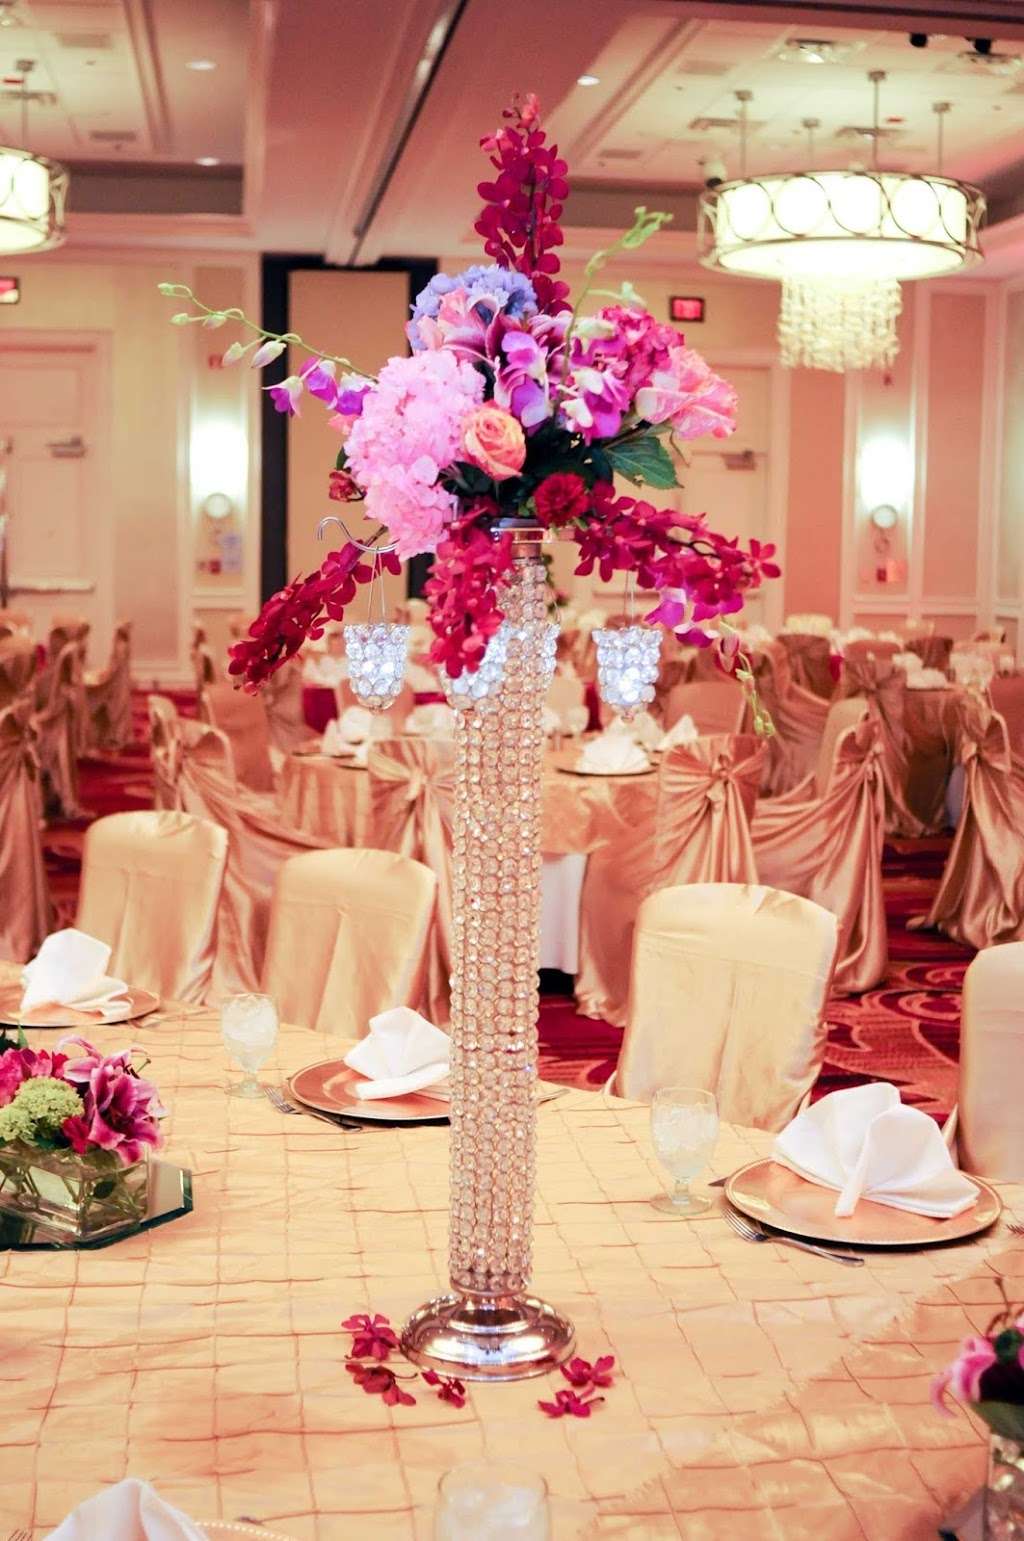 Americas Beautiful Florist | 414 Hungerford Dr #112, Rockville, MD 20850, USA | Phone: (301) 251-0500